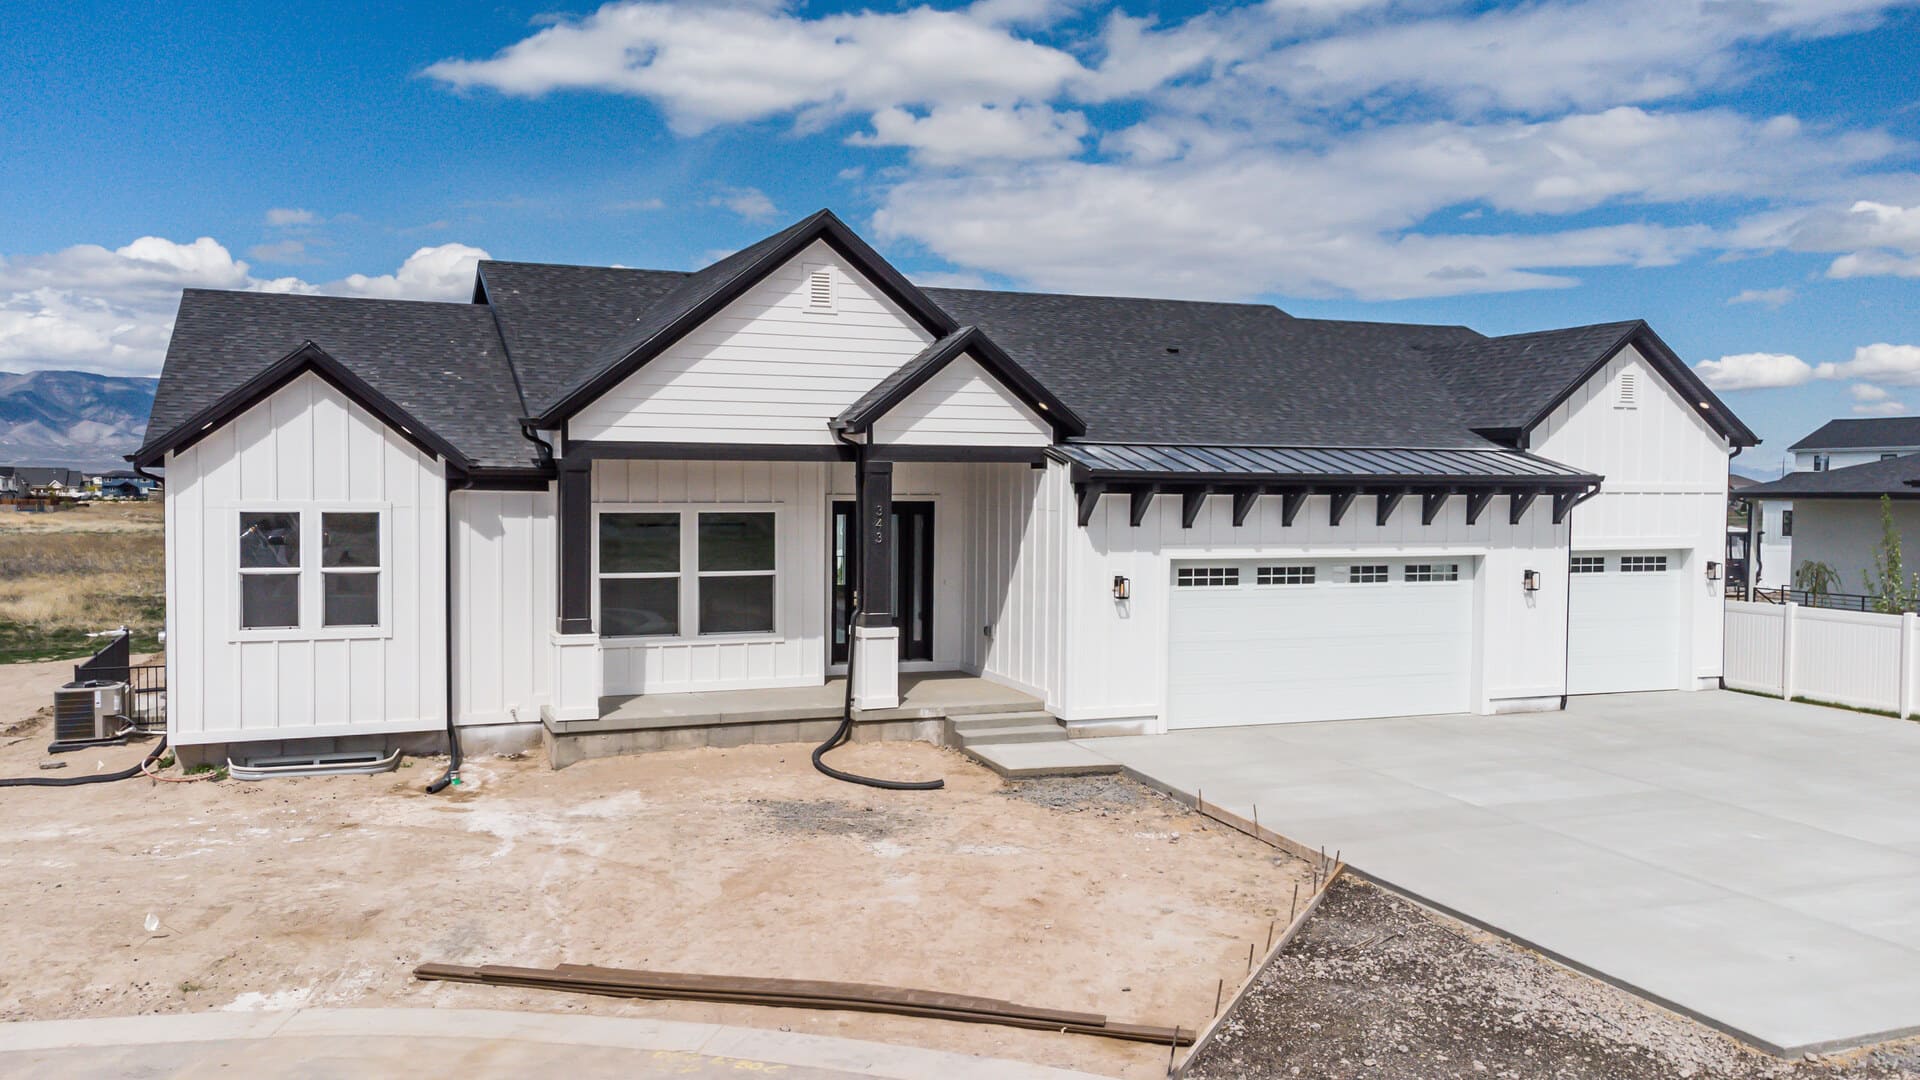 10 Reasons to Build Your Forever Home in Utah | 10X Builders